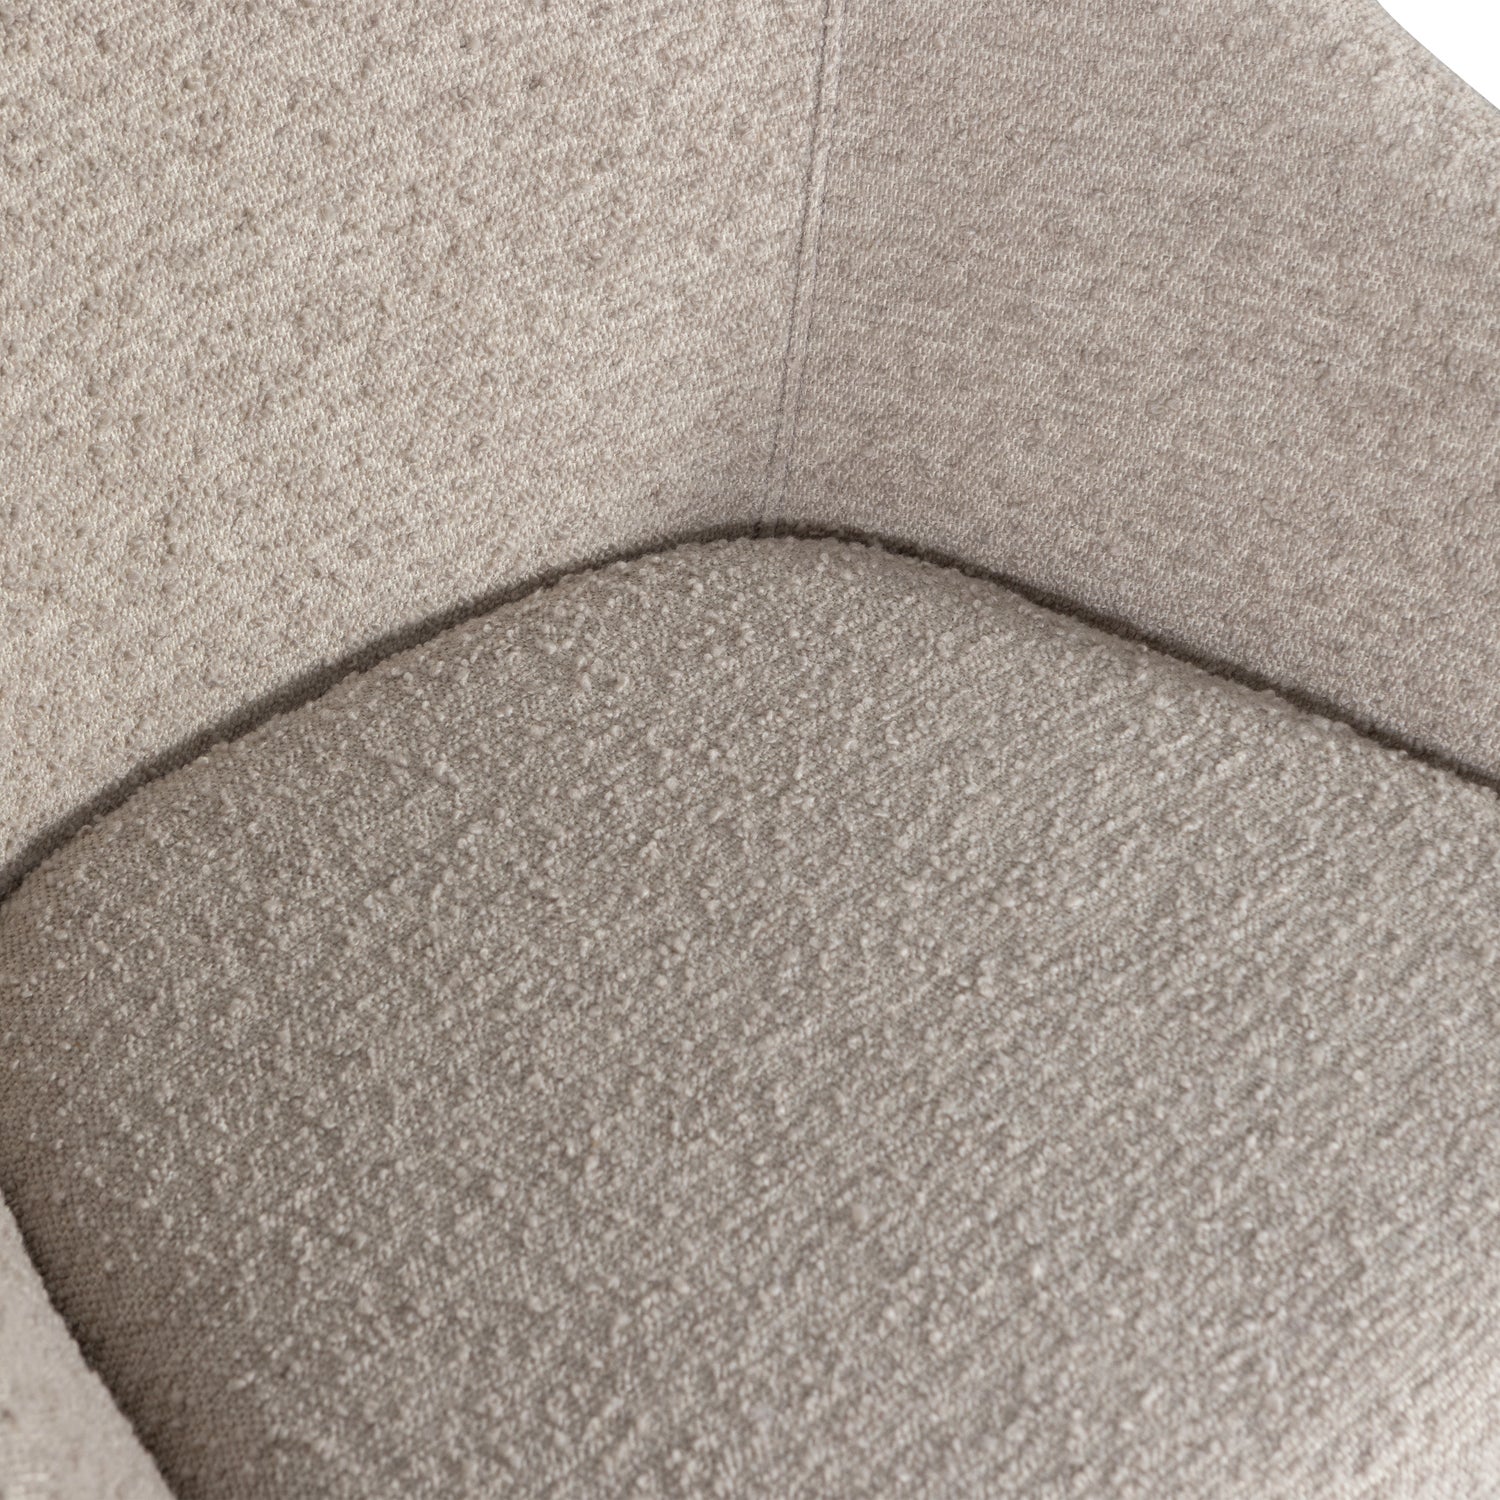 375919-G-02_VS_KW_Ditte_fauteuil_boucle_greige_detail.png?auto=webp&format=png&width=1500&height=1500